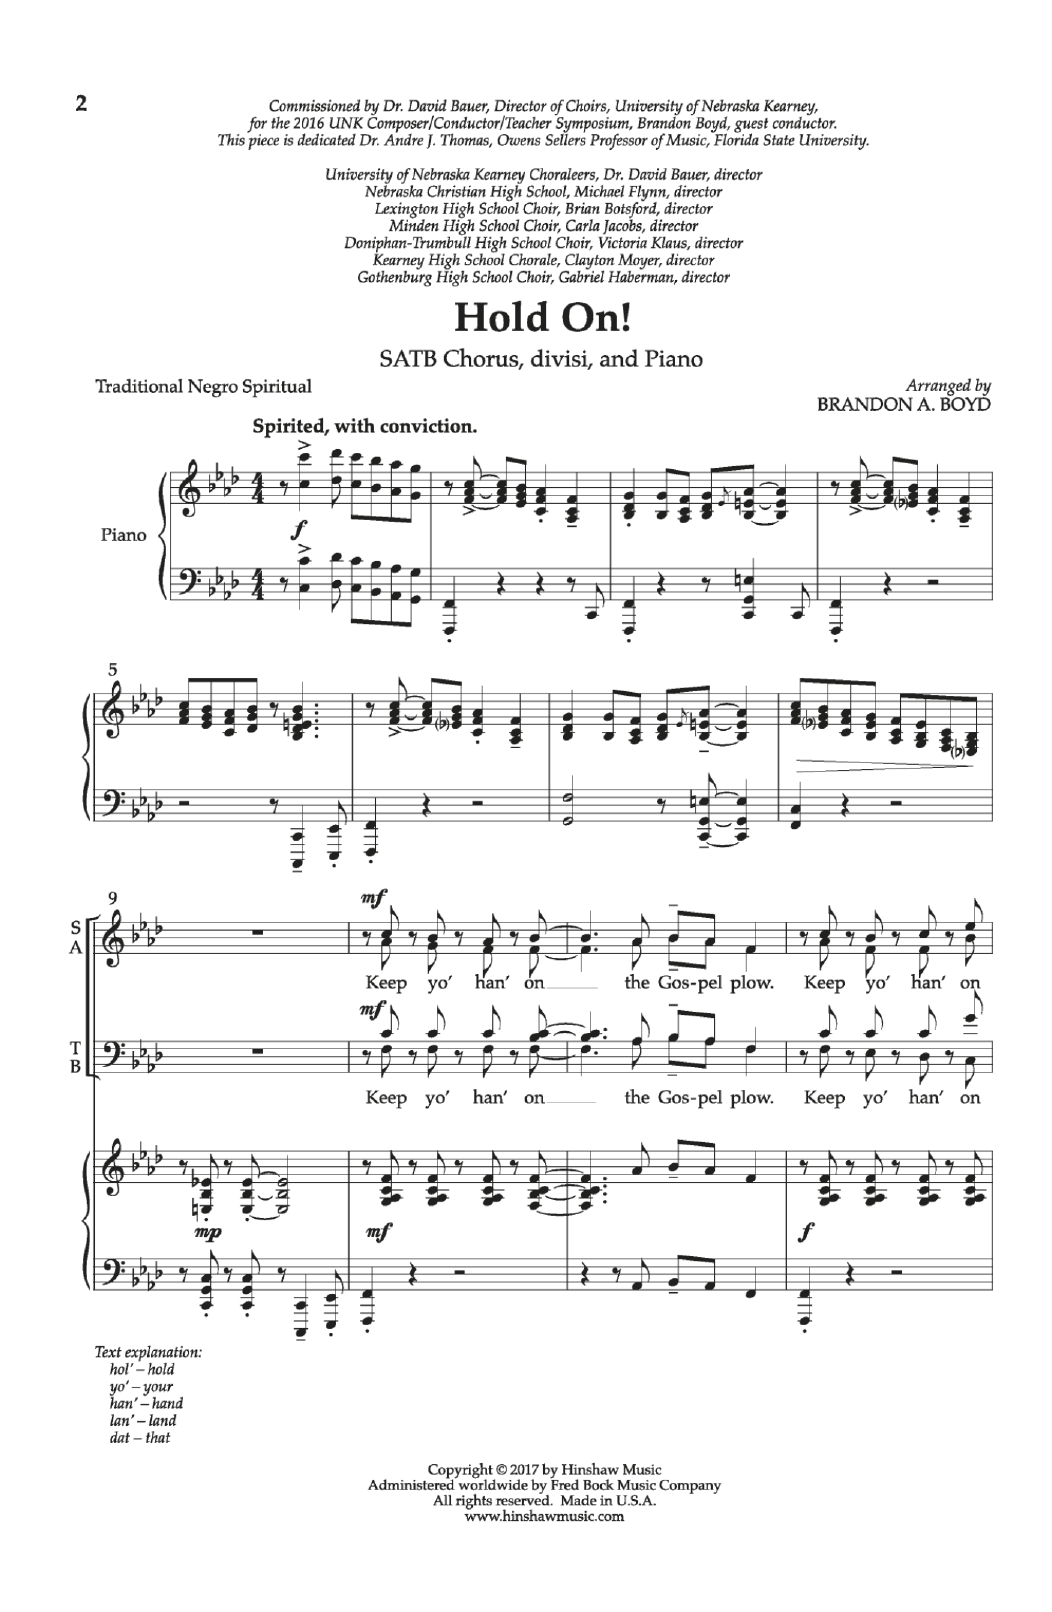 Brandon A. Boyd Hold On! sheet music notes and chords. Download Printable PDF.